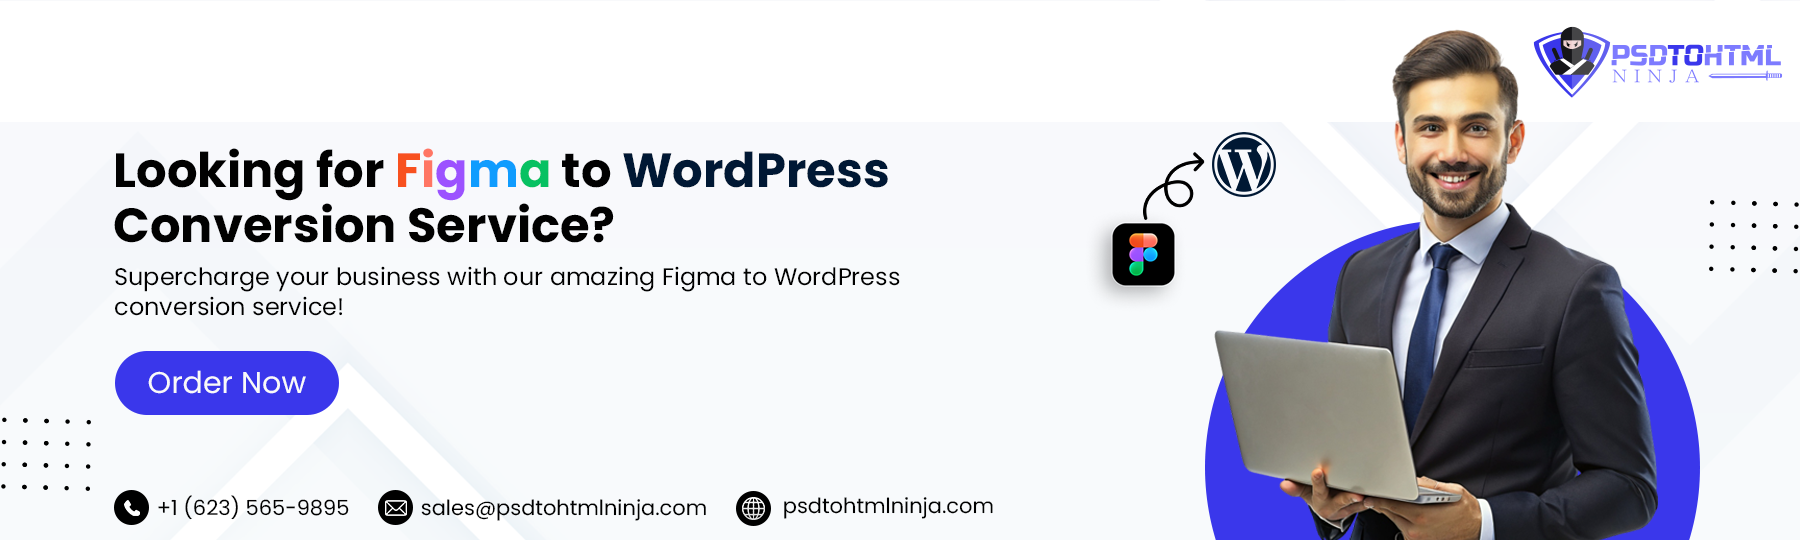 looking-for-figma-to-wordpress-conversion-service